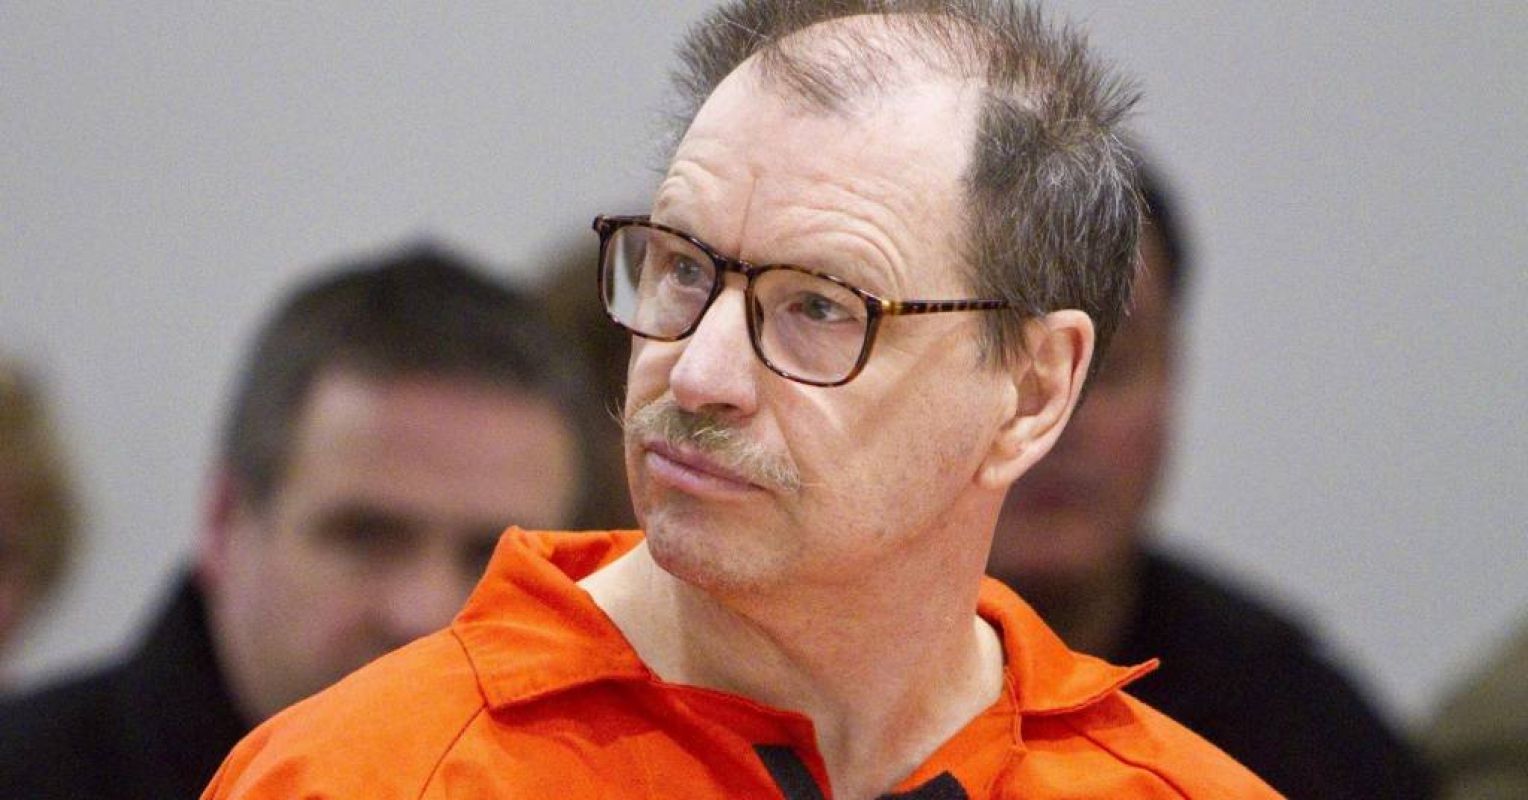 Why do serial killers get pleasure from killing?